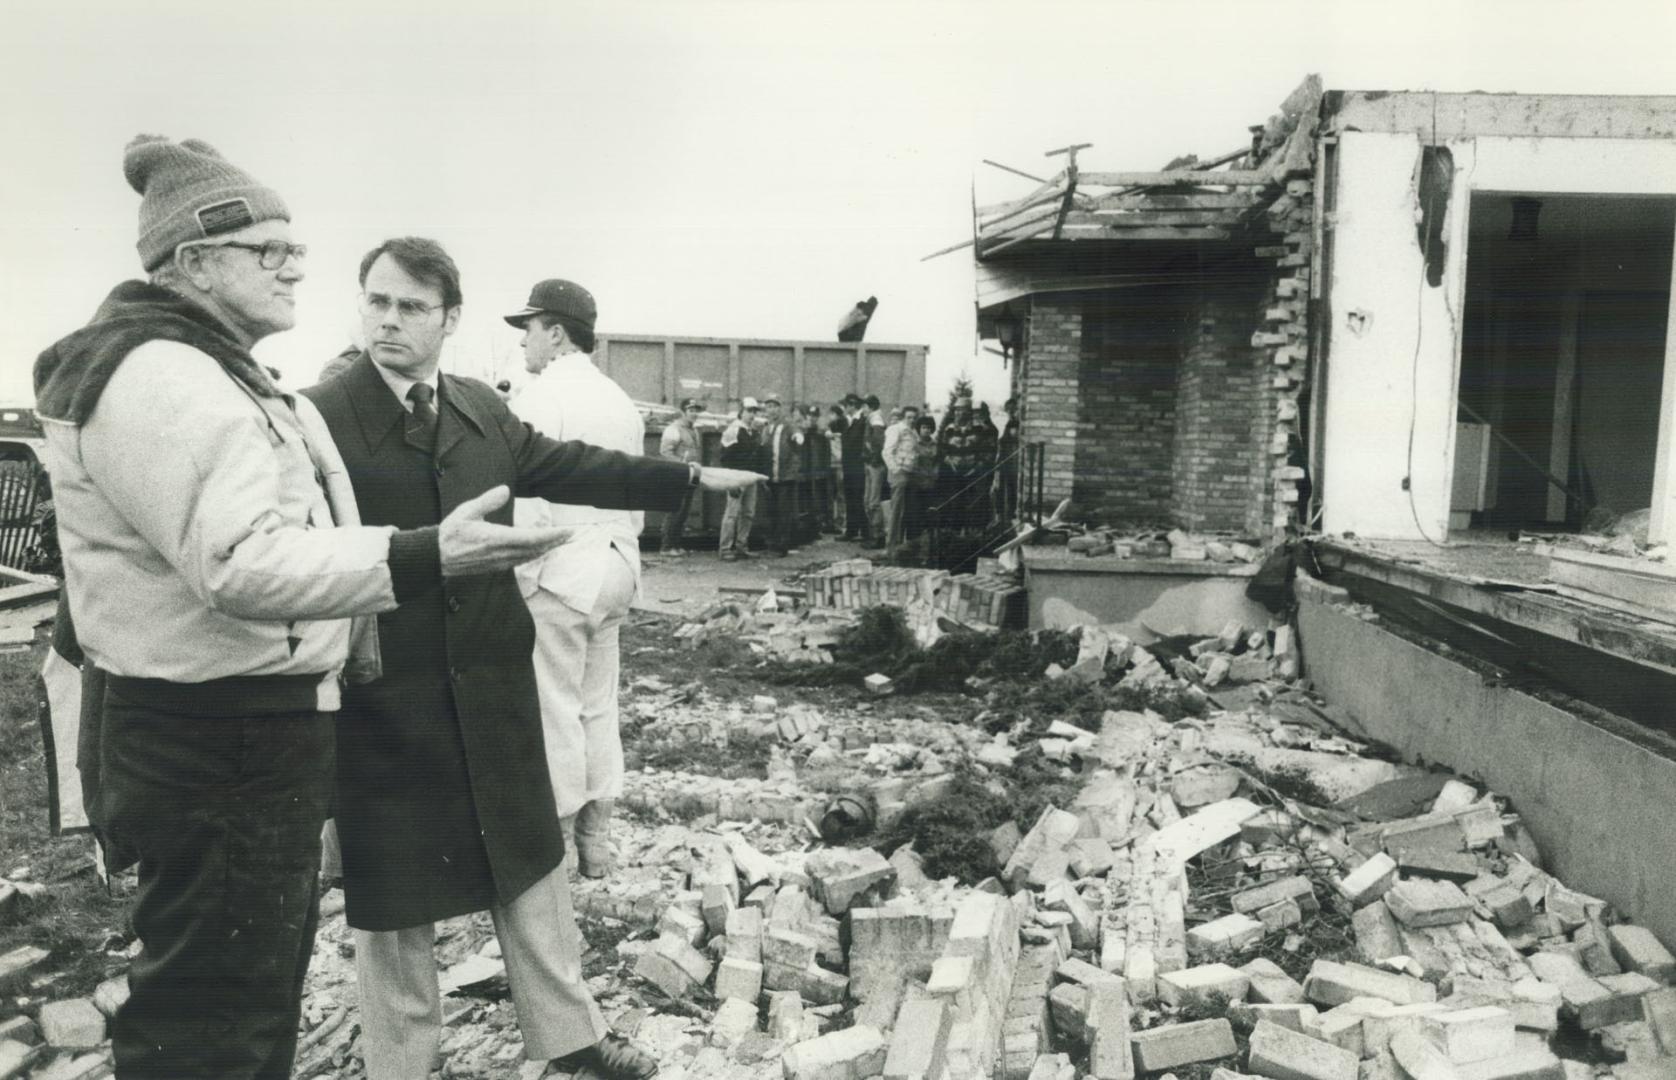 Photo of Min. Claude Bennett talking to John Van Der Wielen in front of Van Der Wielen's damaged home located in Reec s corn five people in his family lived there